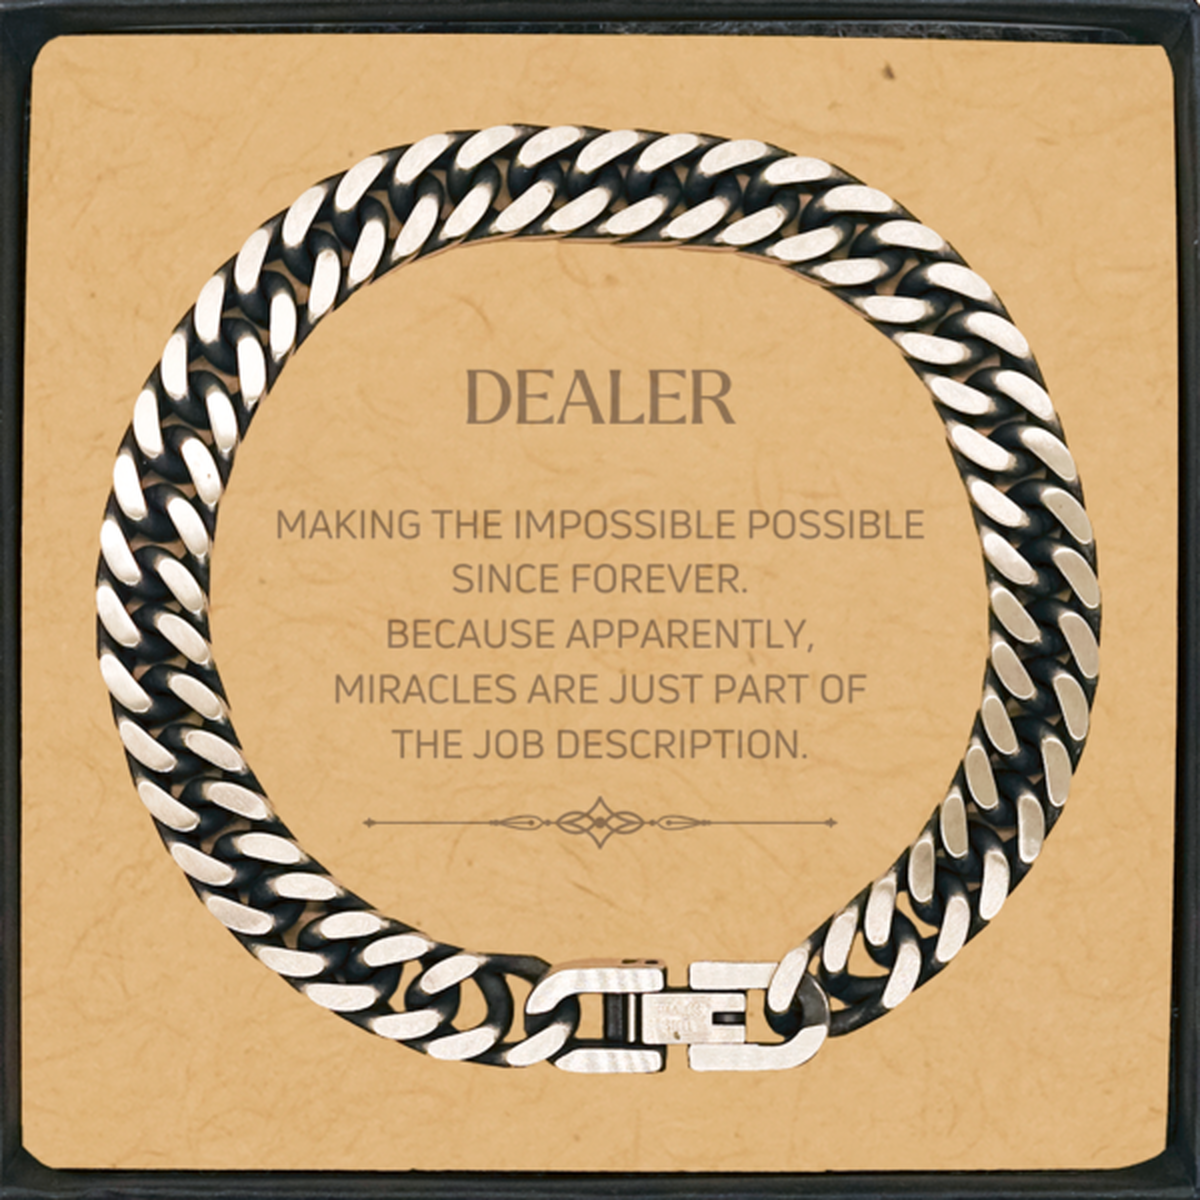 Funny Dealer Gifts, Miracles are just part of the job description, Inspirational Birthday Cuban Link Chain Bracelet For Dealer, Men, Women, Coworkers, Friends, Boss